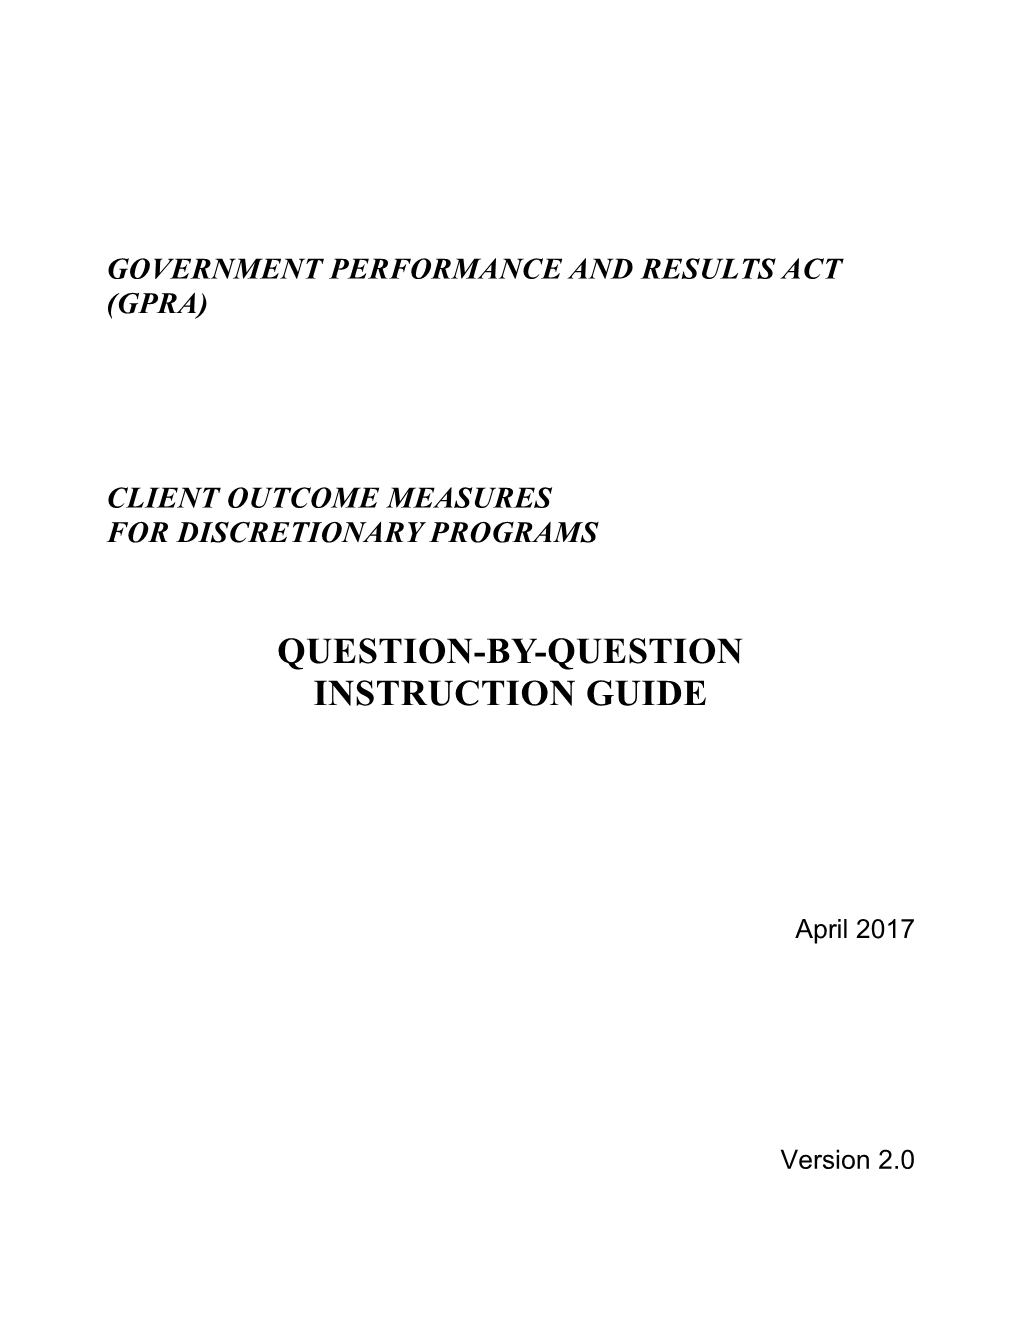 Question-By-Question Instruction Guide